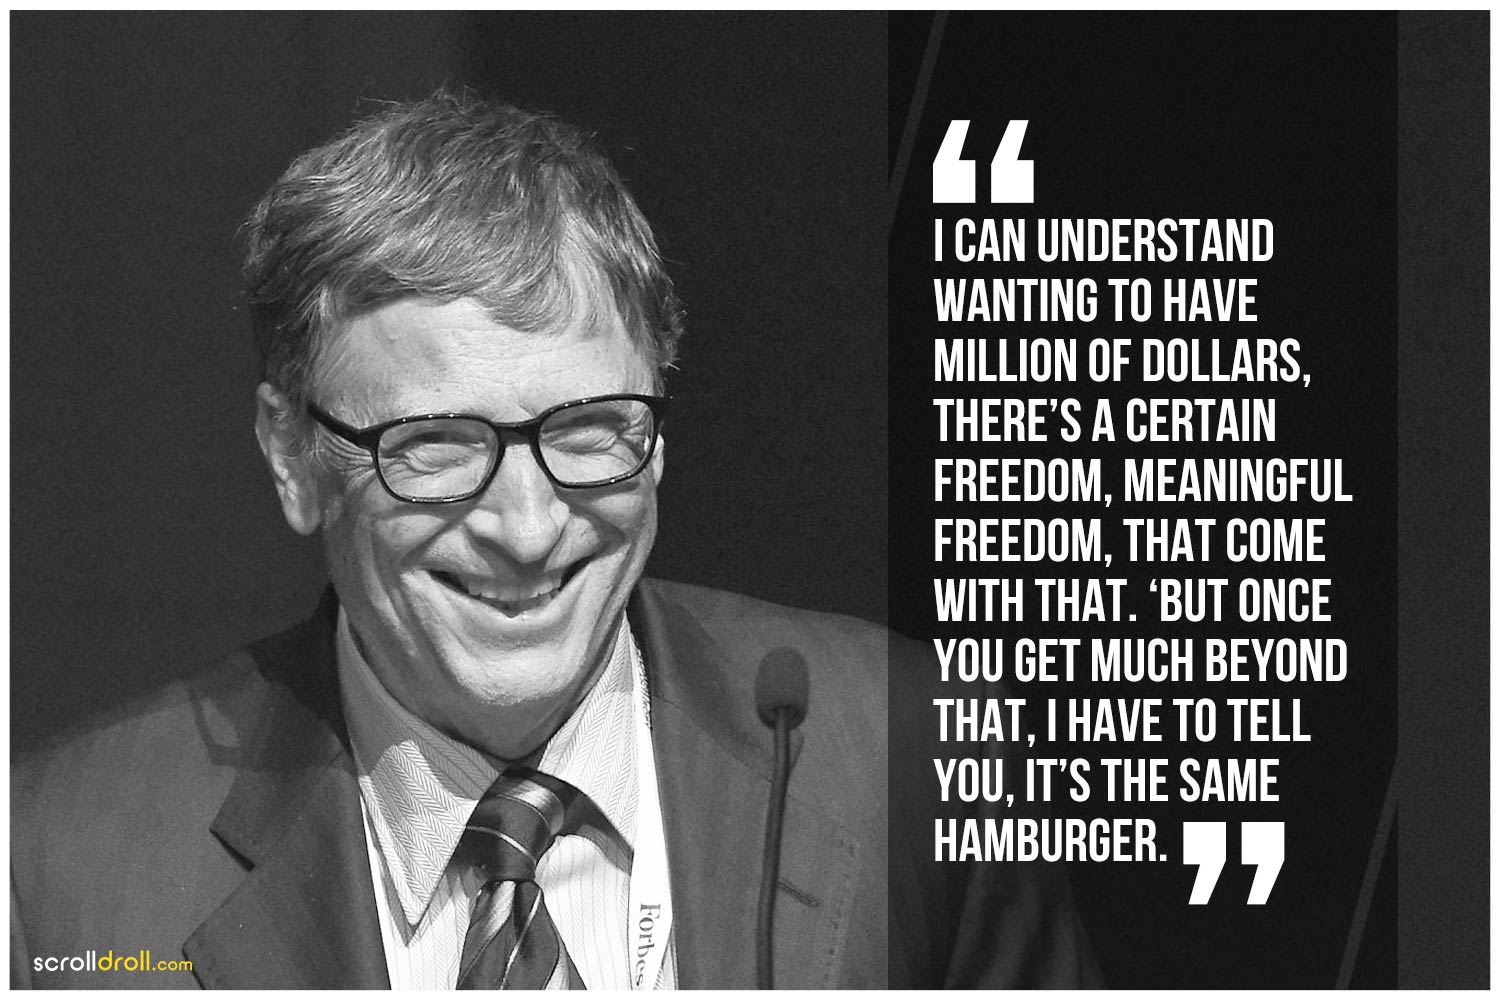 -Bill gates- I can understand wanting to have millions of dollars, There's a certain freedom, meaningful freedom, that come with that. 'but once you get much beyond that, I have to tell you, Its the same hamburger. 